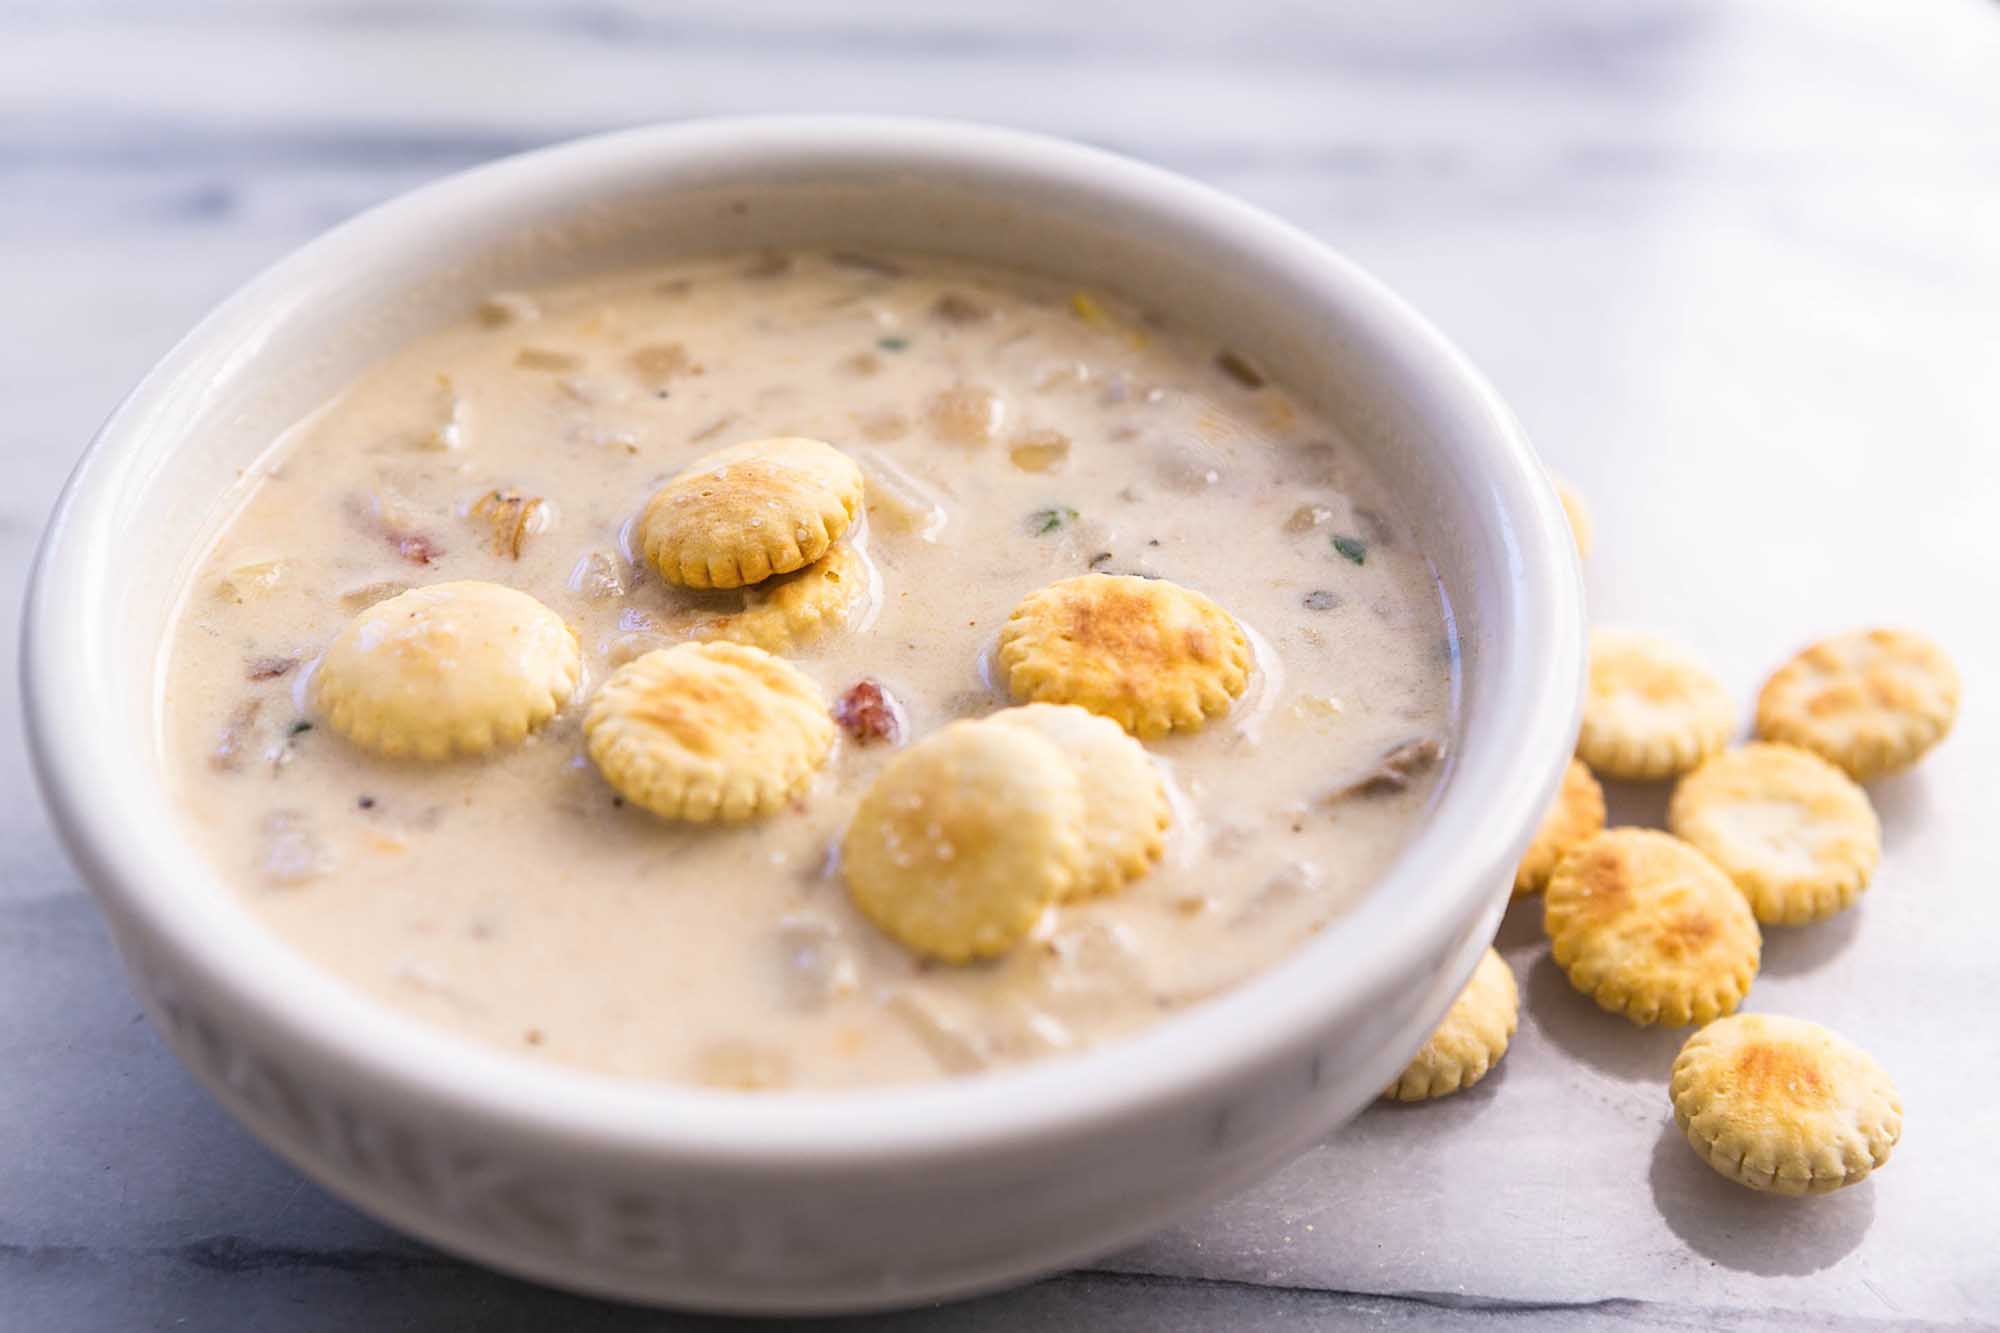 🦞 Say “Yum” Or “Yuck” to These Seafood Dishes and We’ll Reveal How Picky You Are Clam Chowder